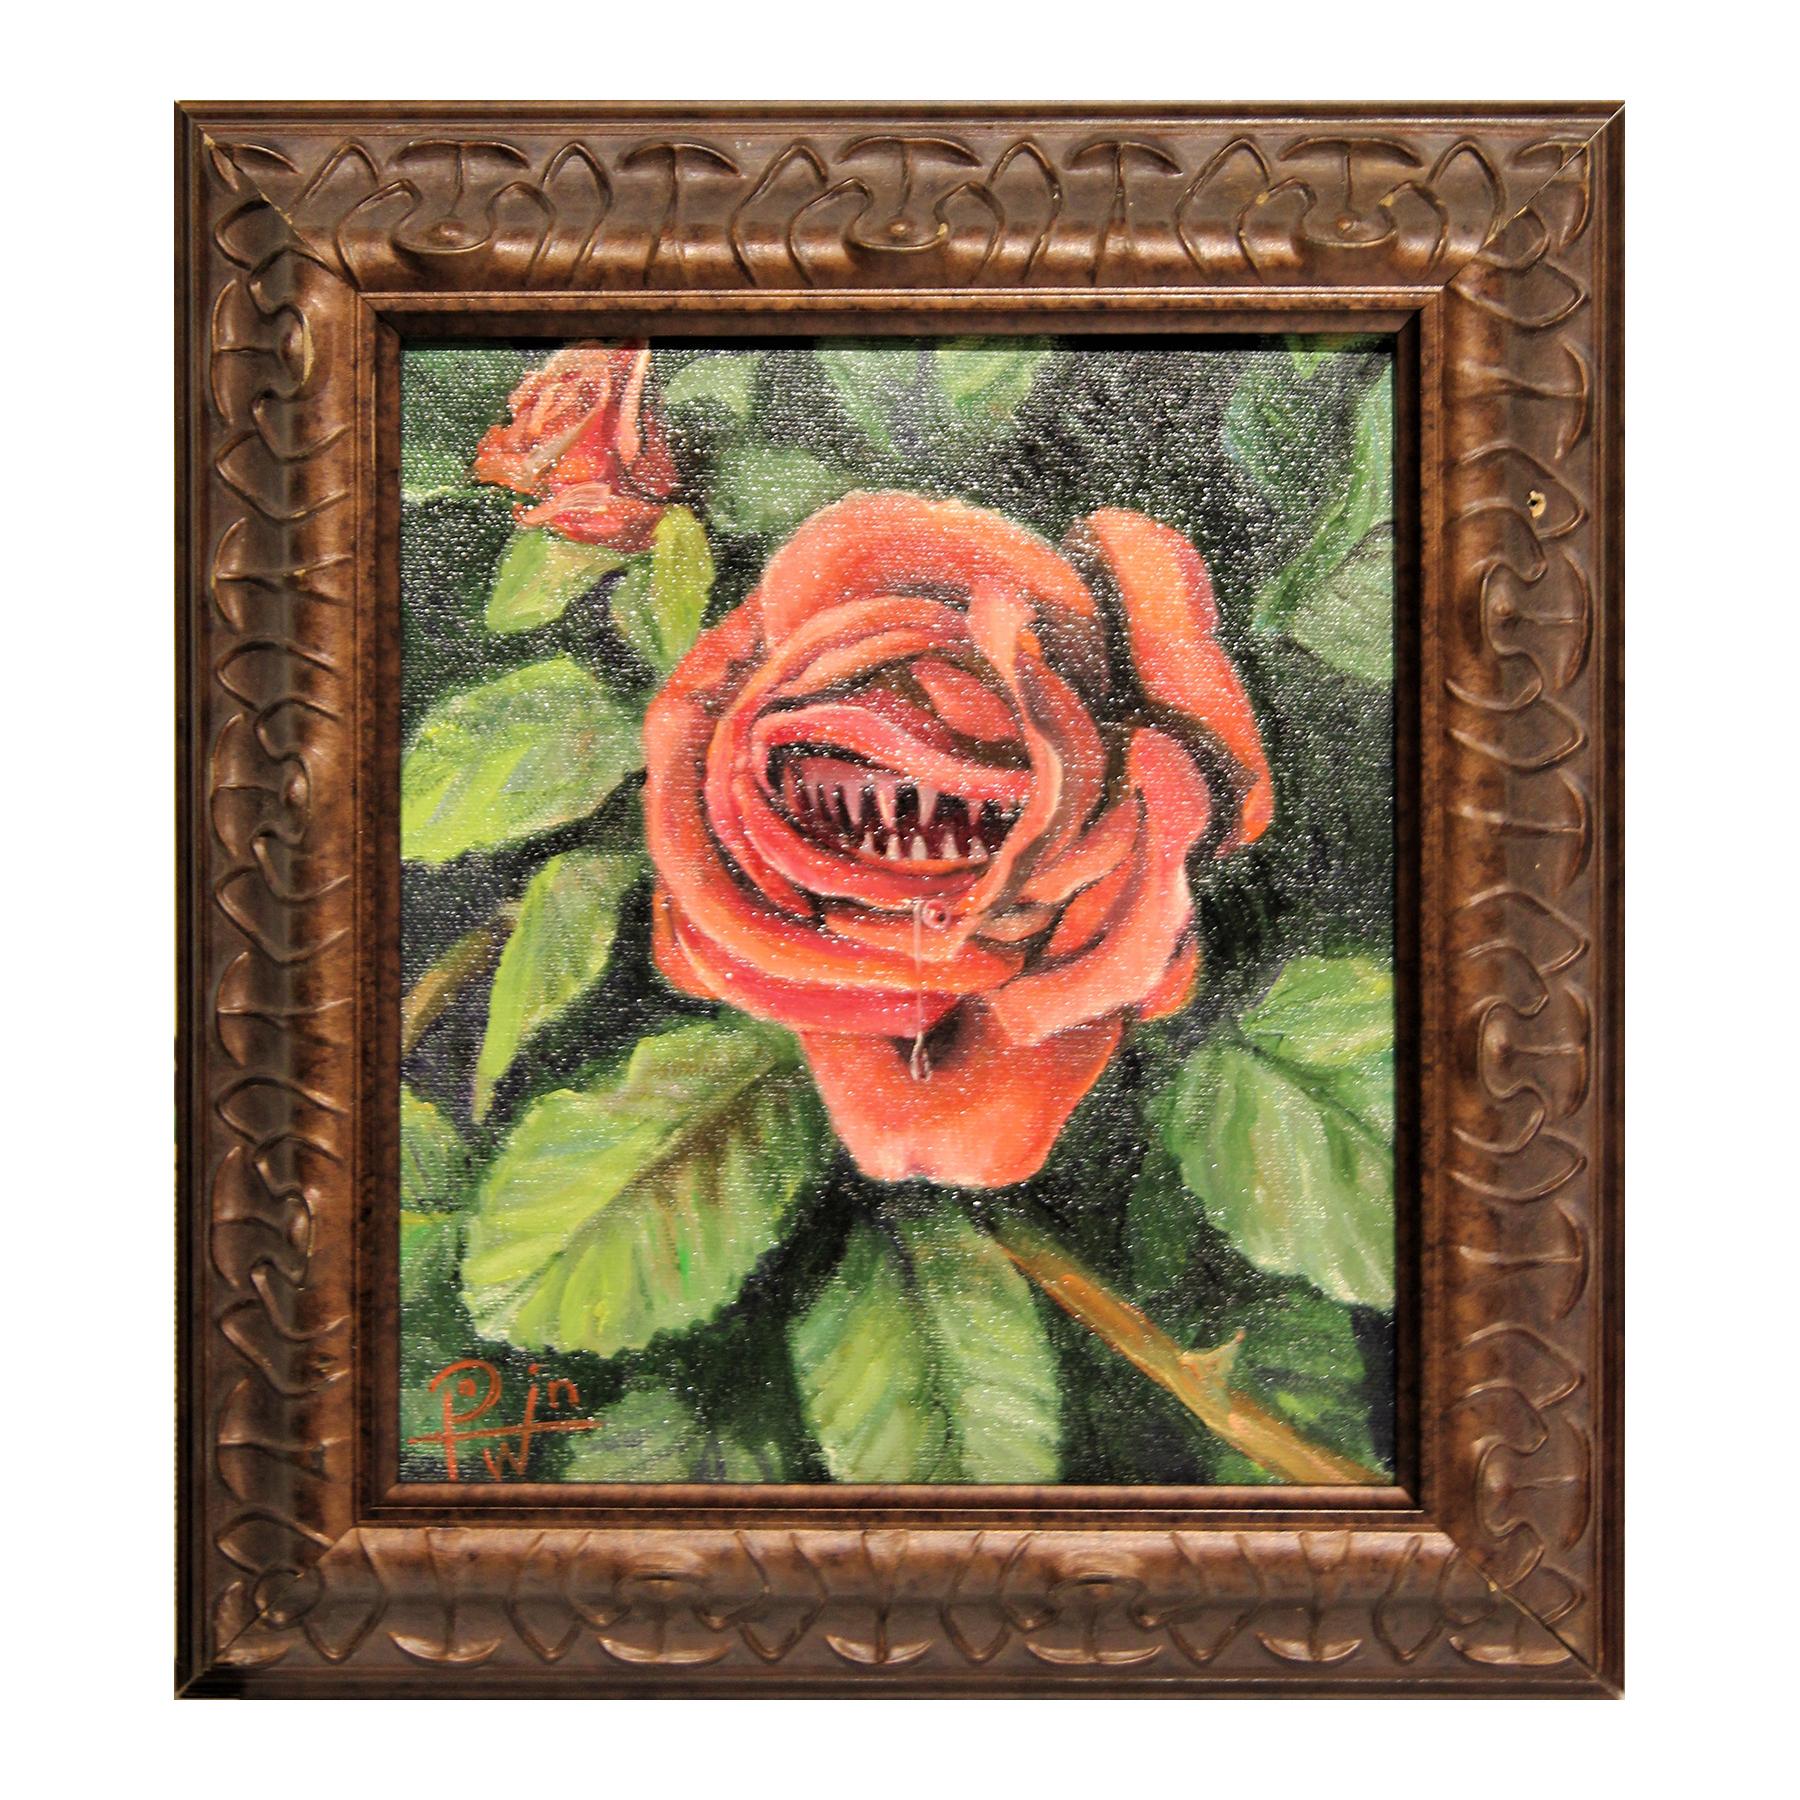 Henry David Potwin Still-Life Painting - “Hungry Rose” Contemporary Surrealist Flower with Teeth Still Life Painting